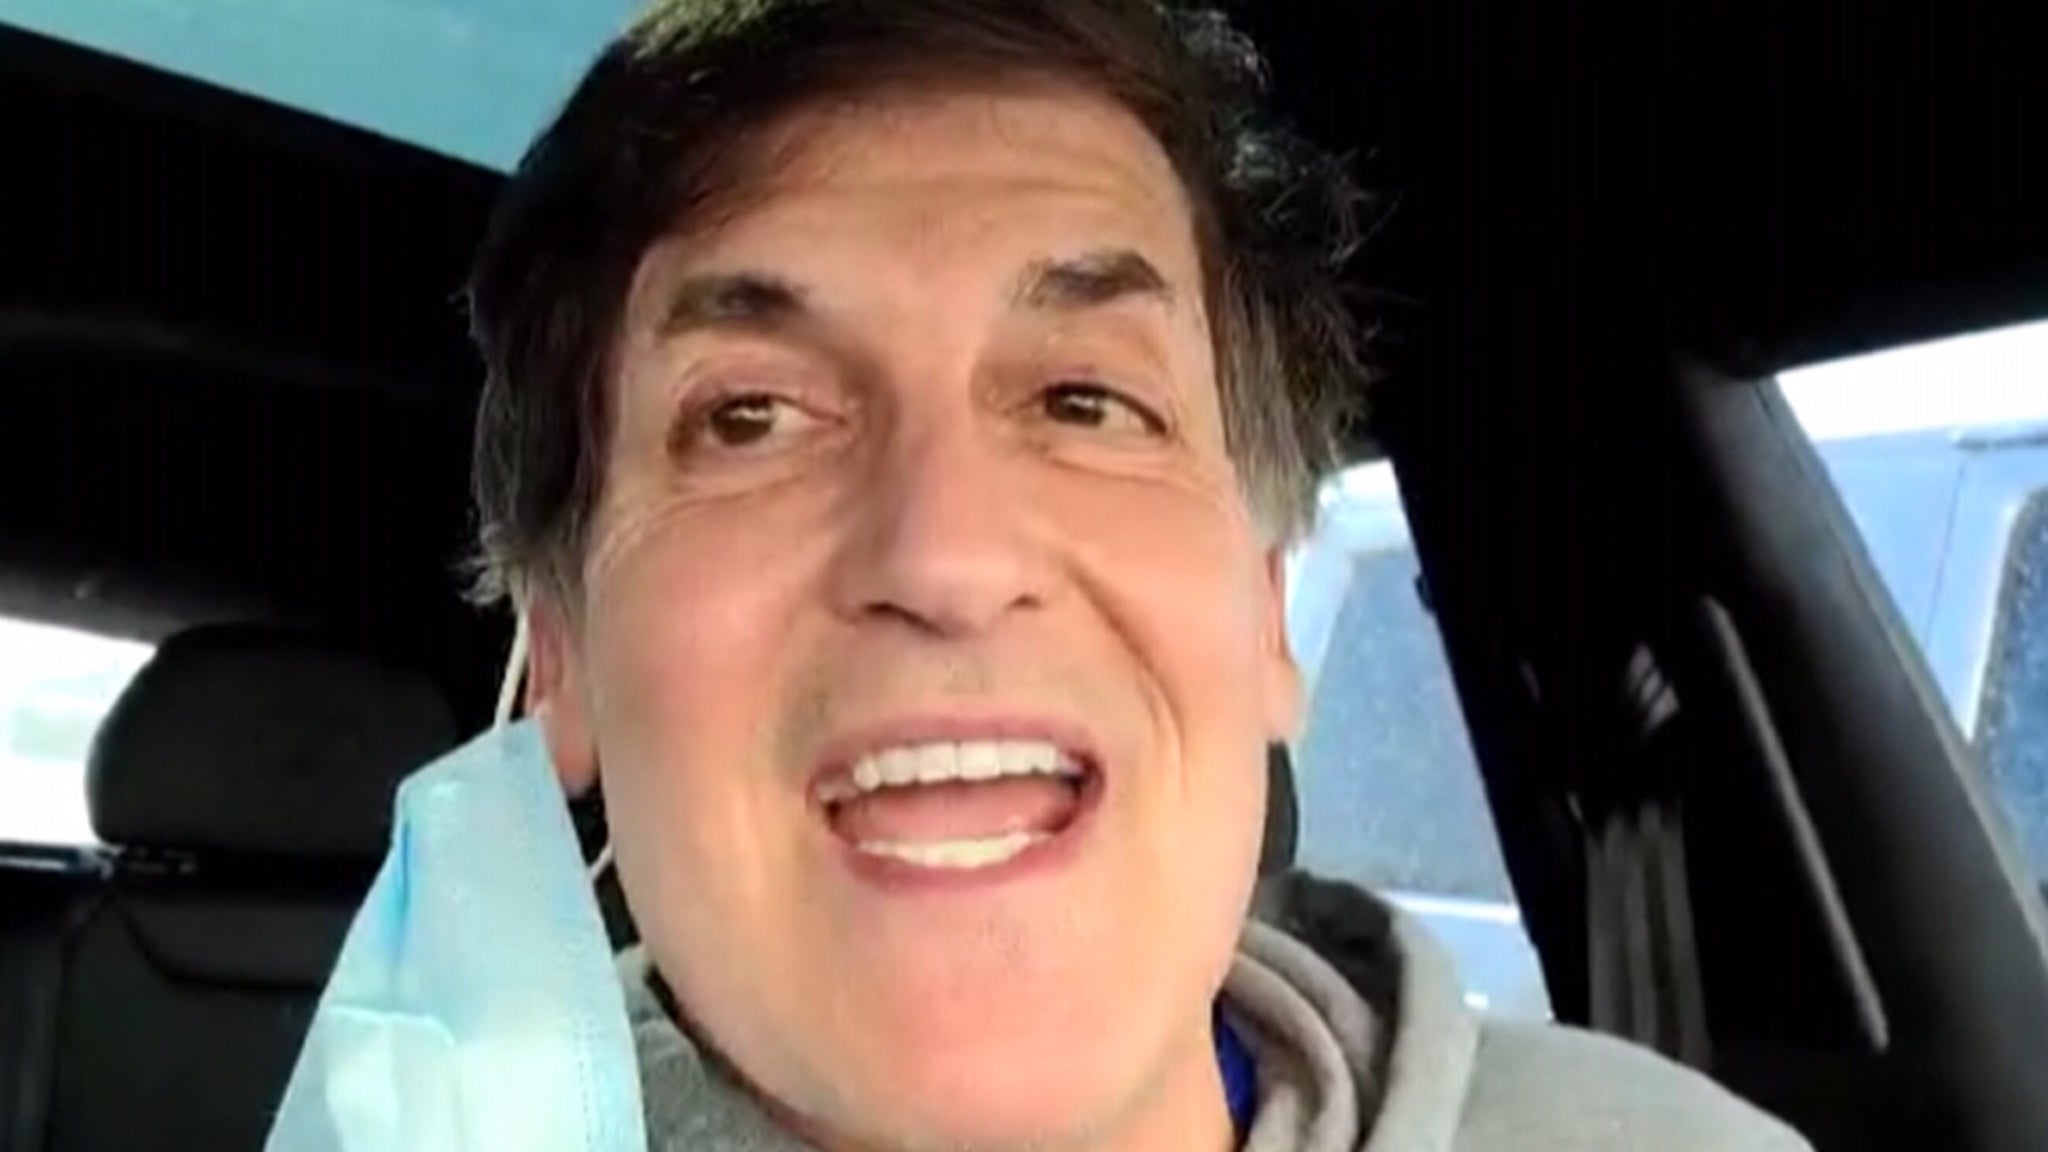 Mark Cuban says the 11-year-old boy’s trading stocks and learns difficult lessons